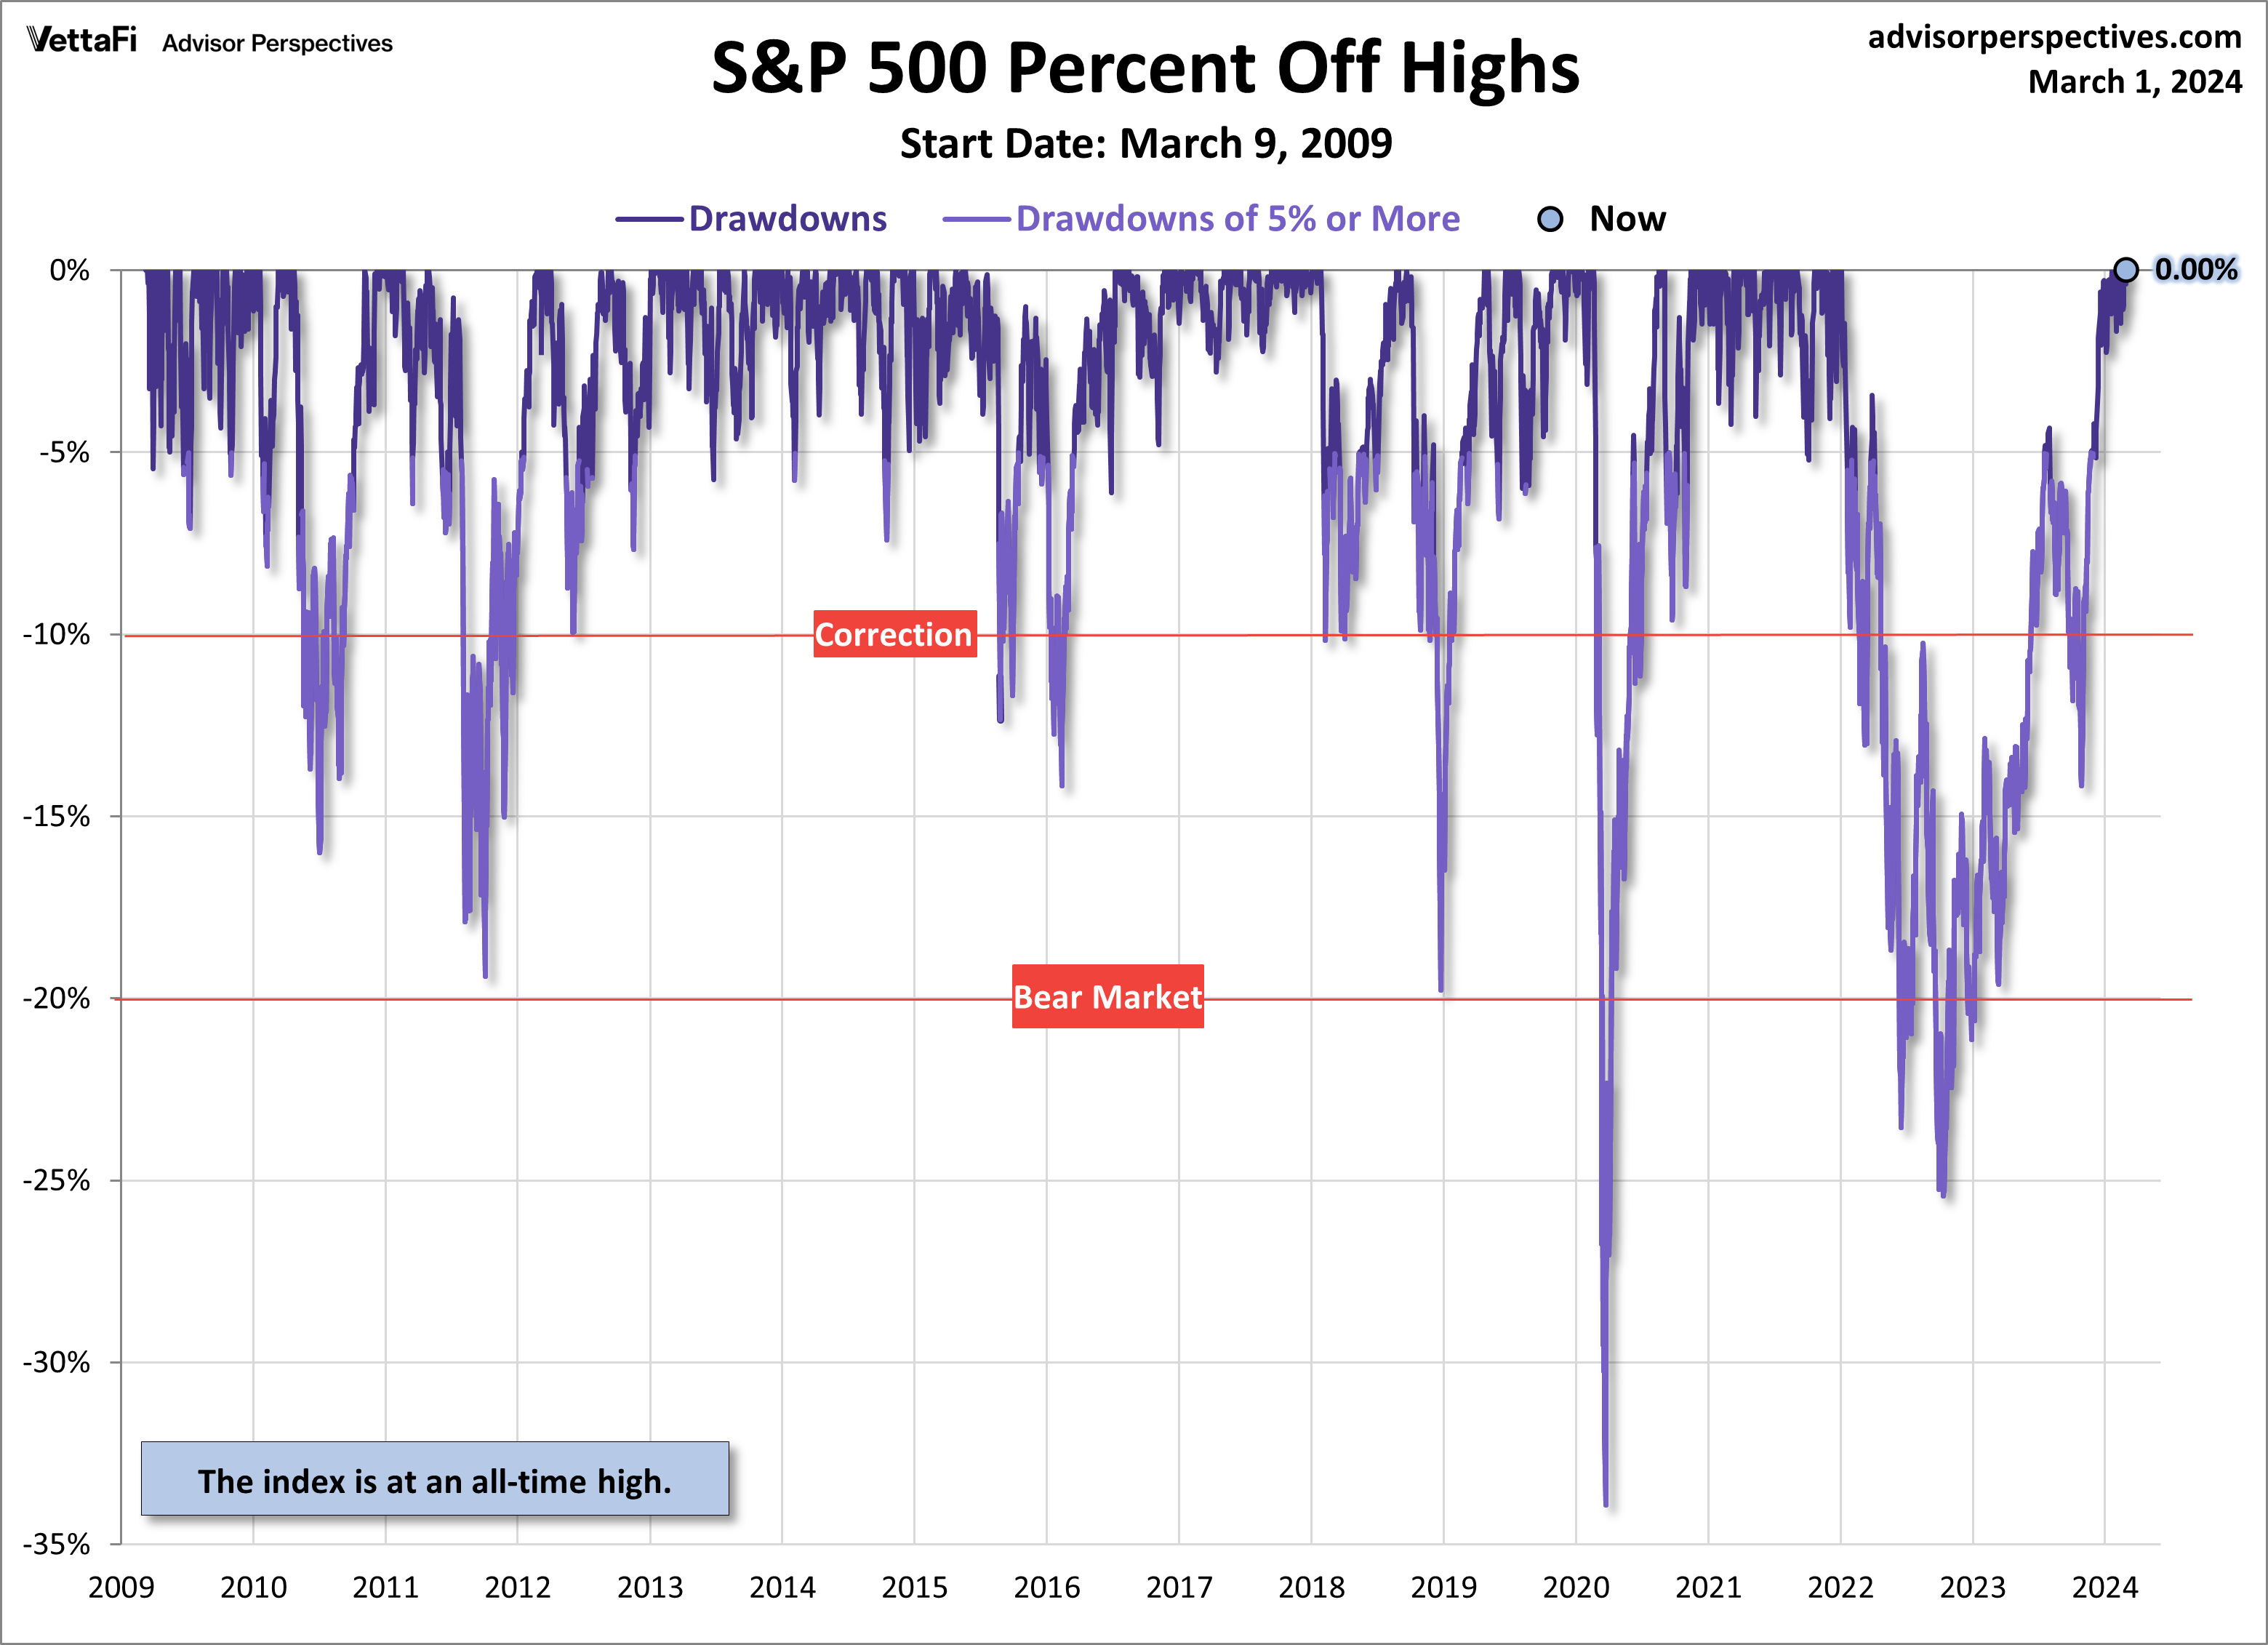 S&P 500 Percent Off Highs Since March 9, 2009